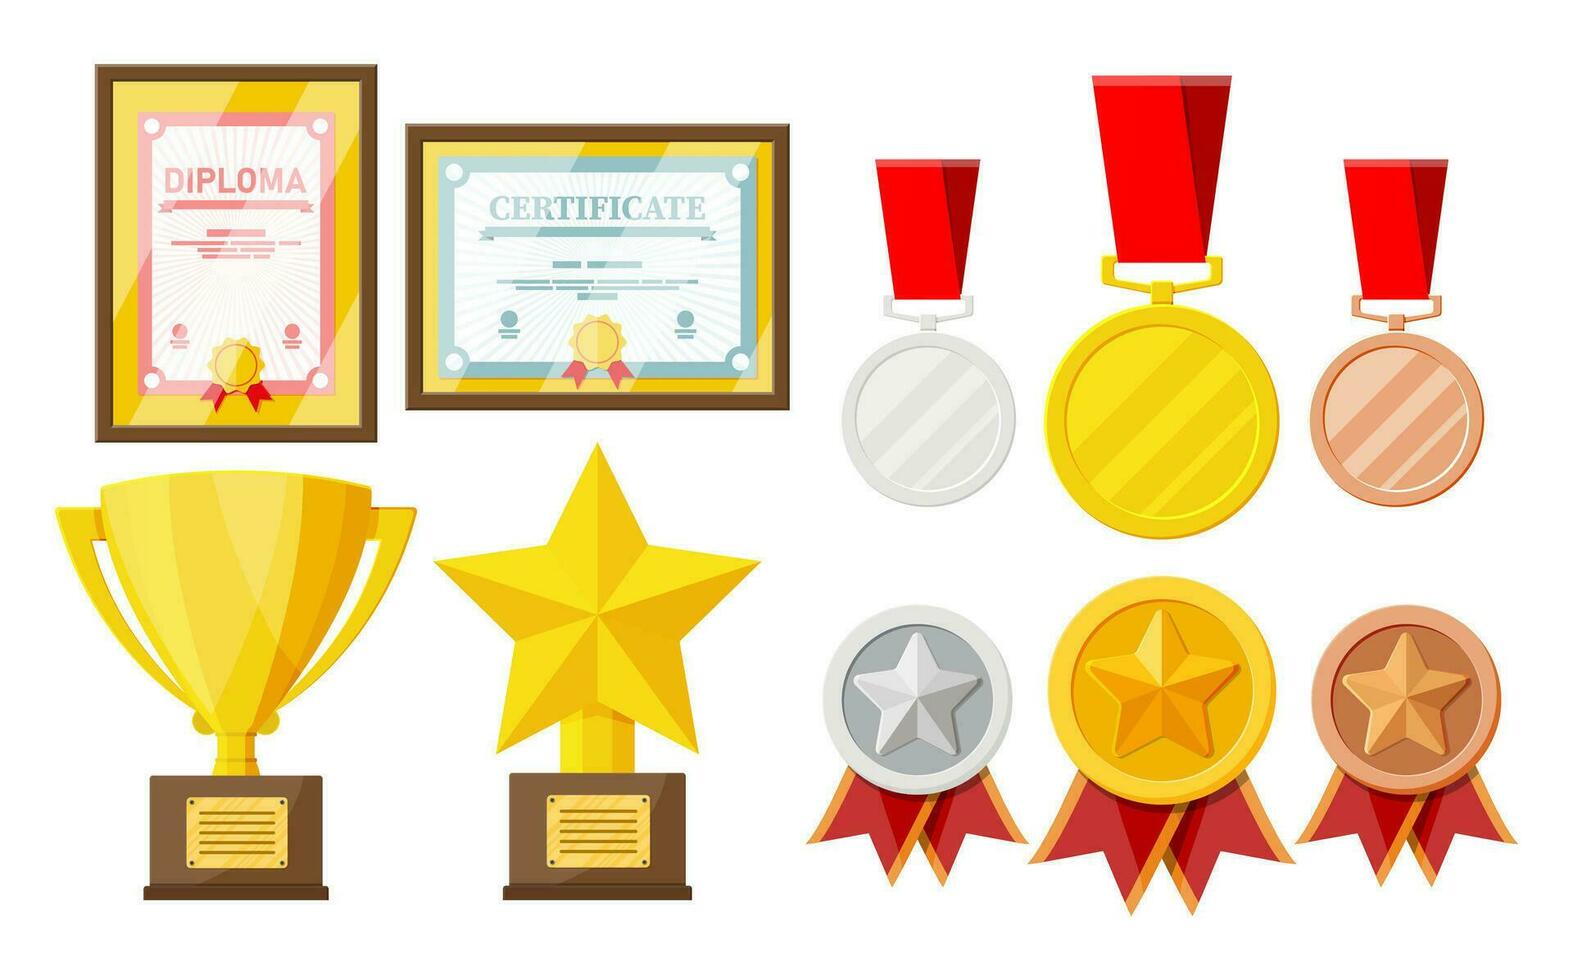 Trophy and awards collection. Diploma and certificate in frames. Competition prizes, cups and medals. Award, victory, goal, champion achievement. Vector illustration in flat style